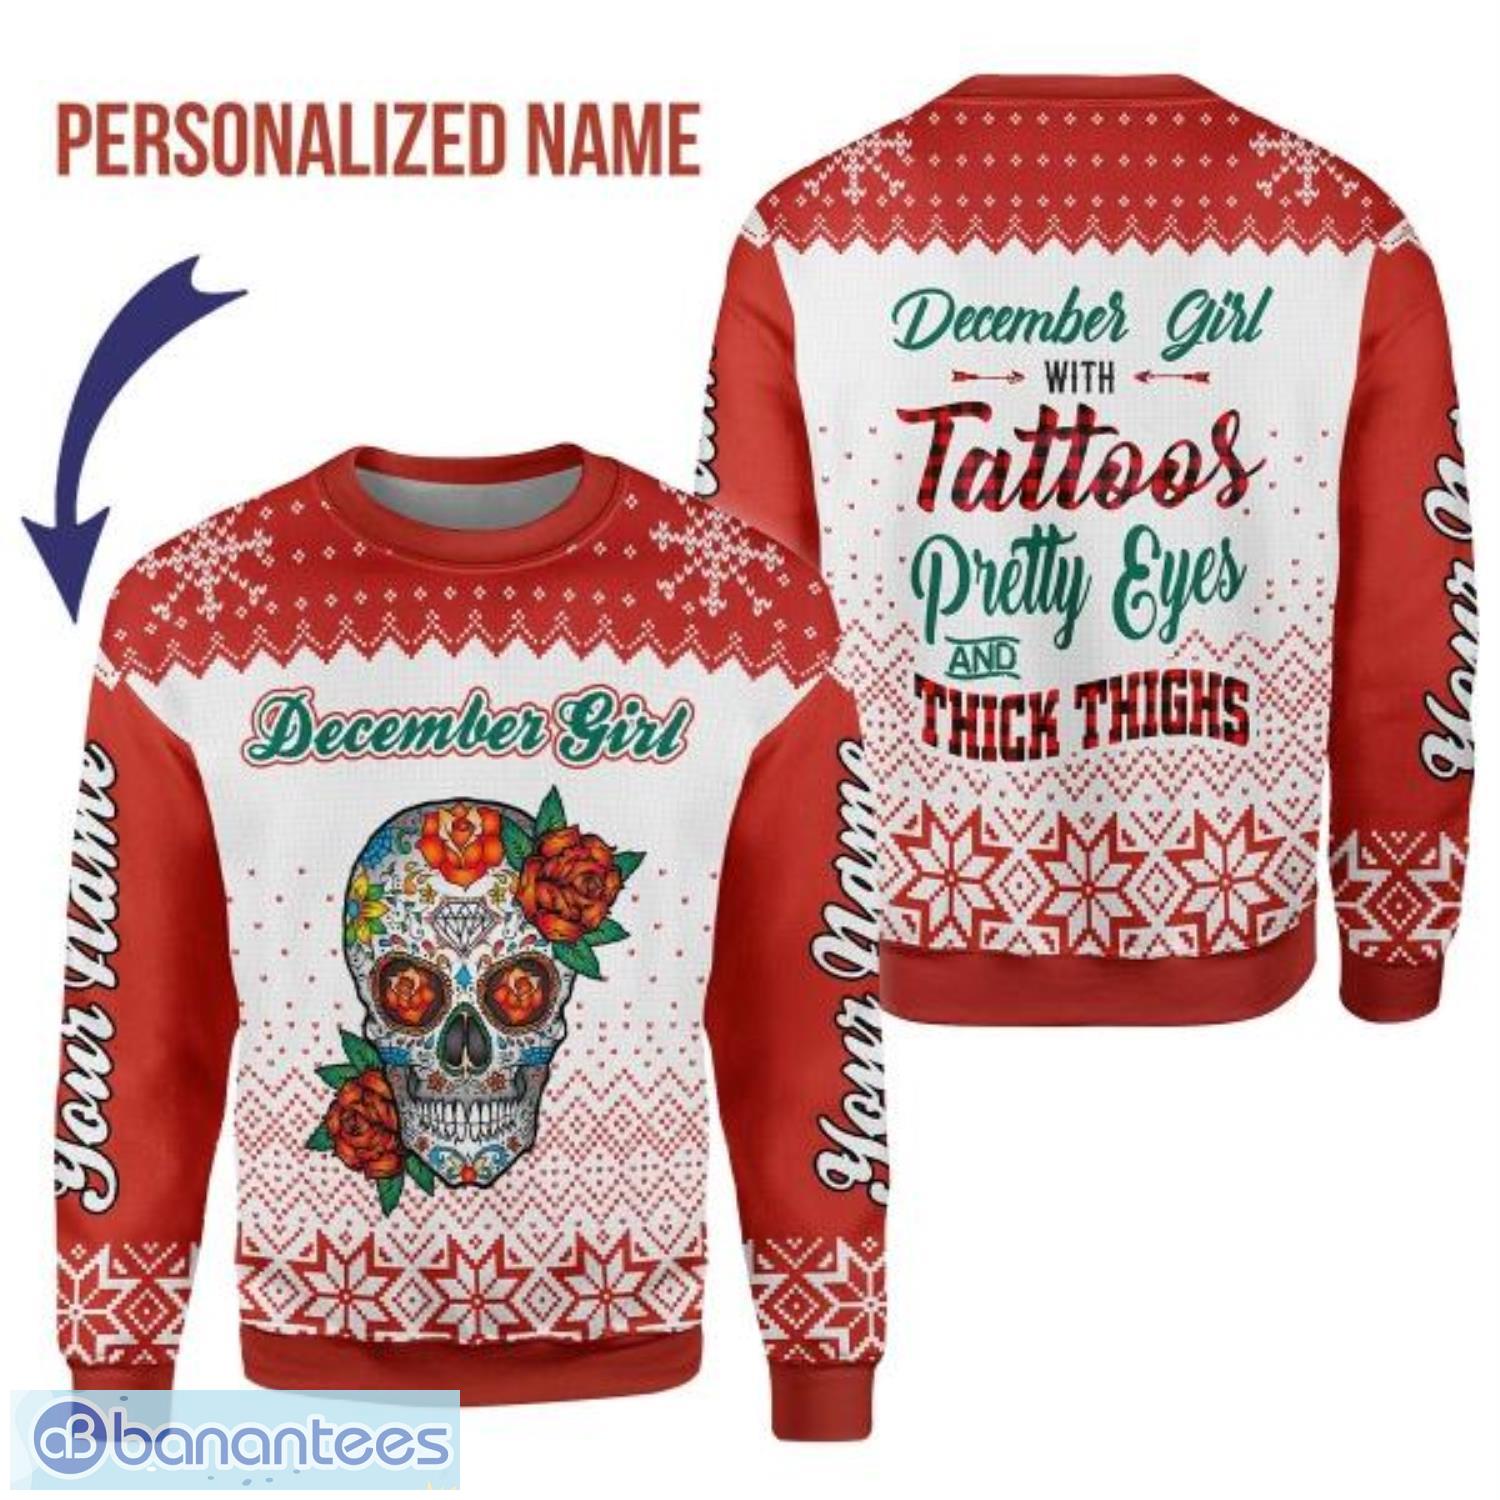 Personalized Name December Girl With Tatoos Pretty Eyes And Thick Thighs 3D Ugly Christmas Sweater Christmas Gift Product Photo 1